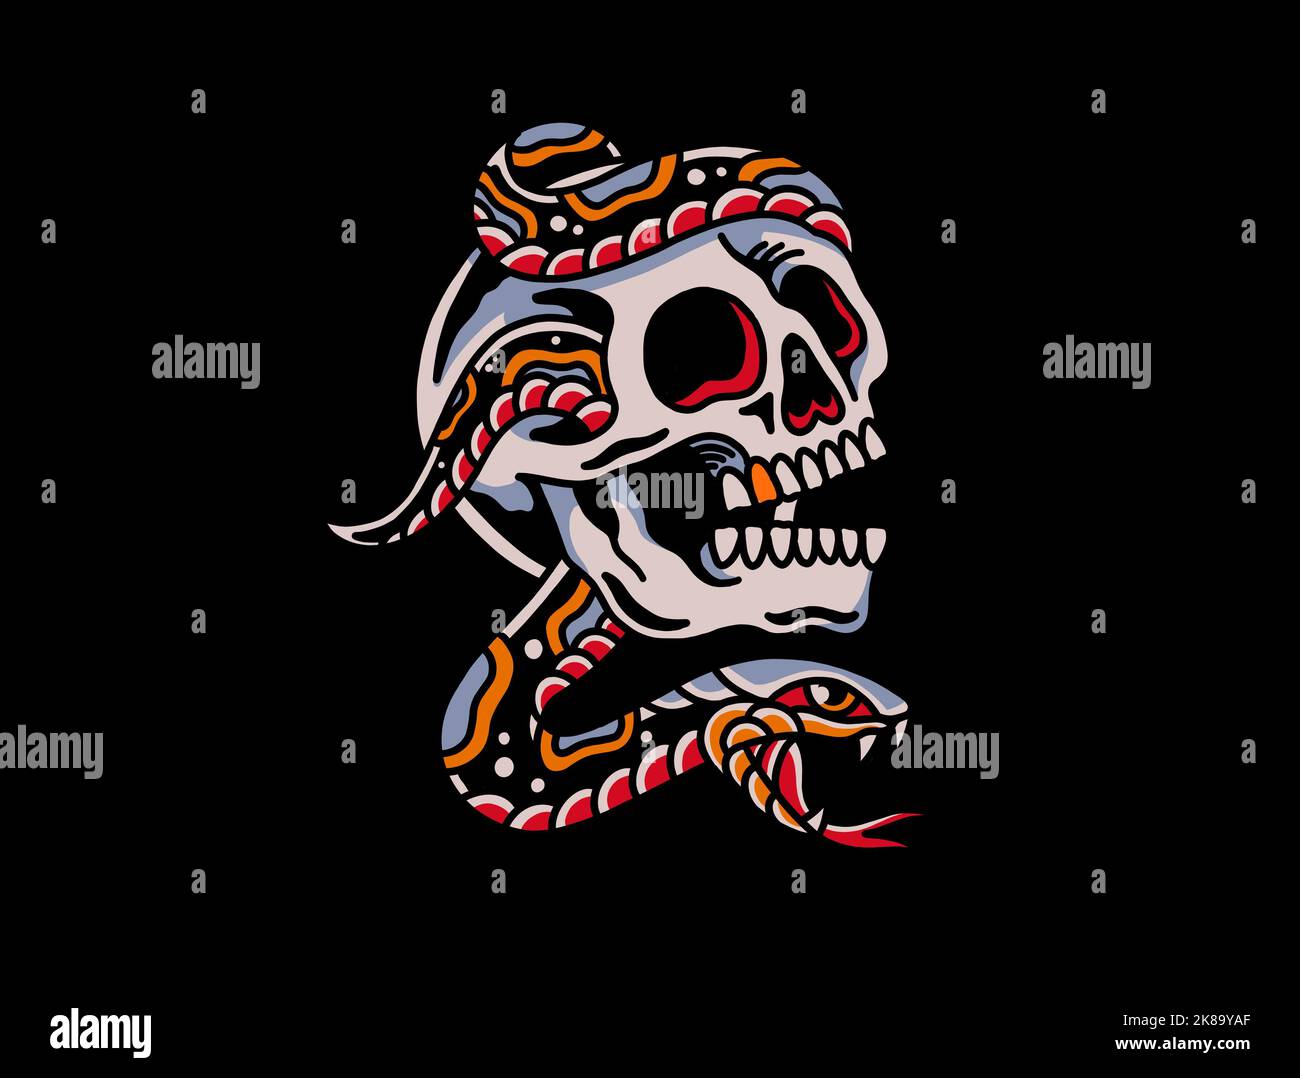 Old school traditional tattoo inspired cool graphic design illustration human skull with snake for merchandise t shirts stickers wallpapers Stock Photo